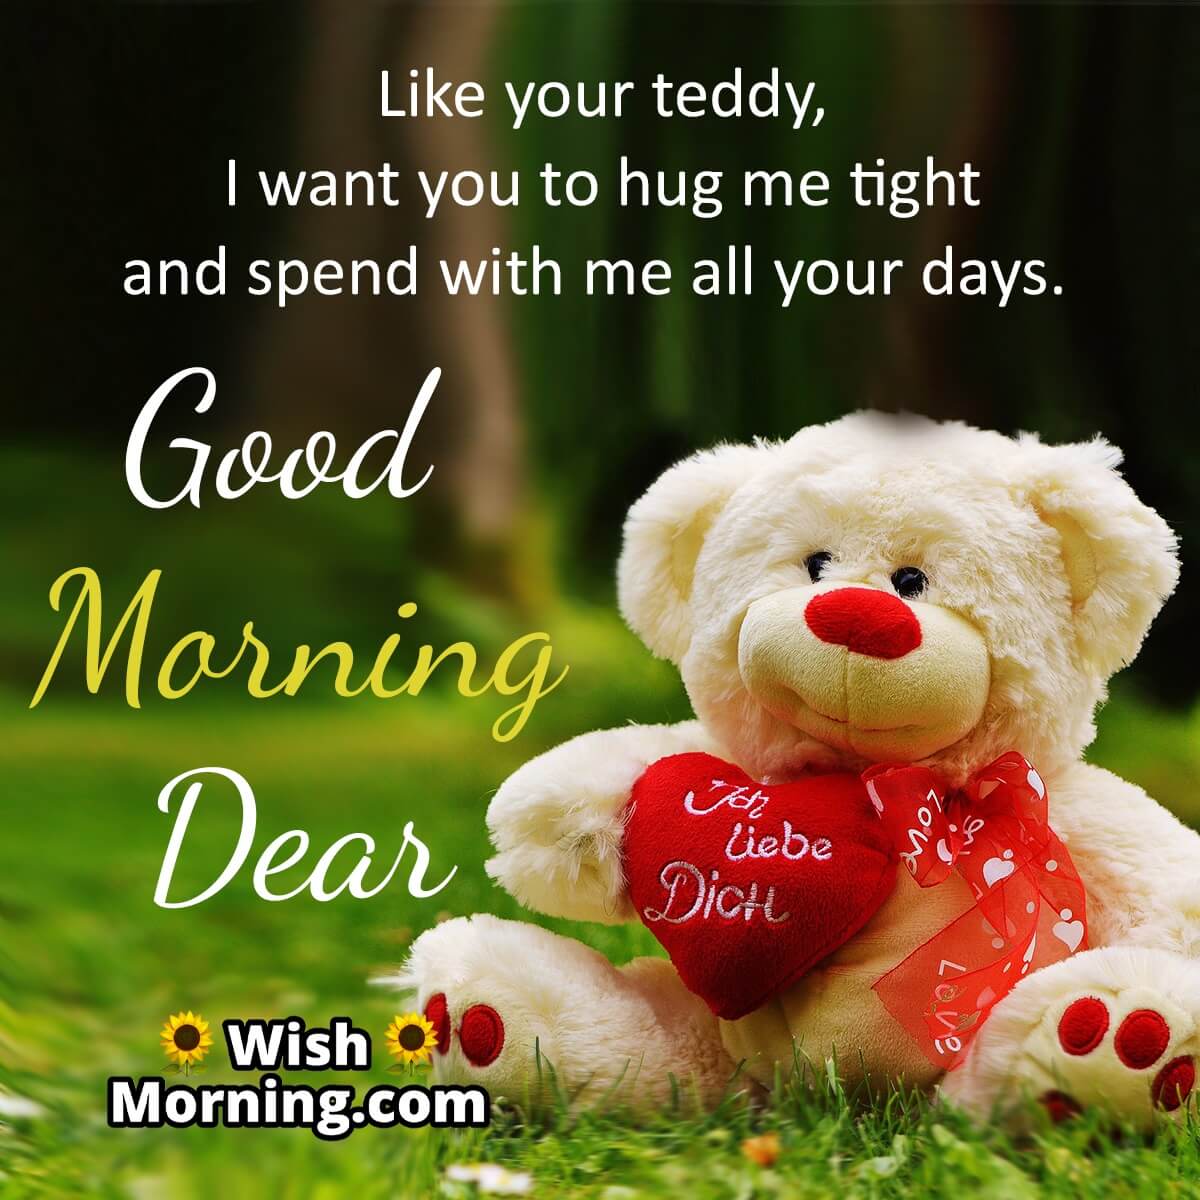 Good Morning Teddy Message For Her